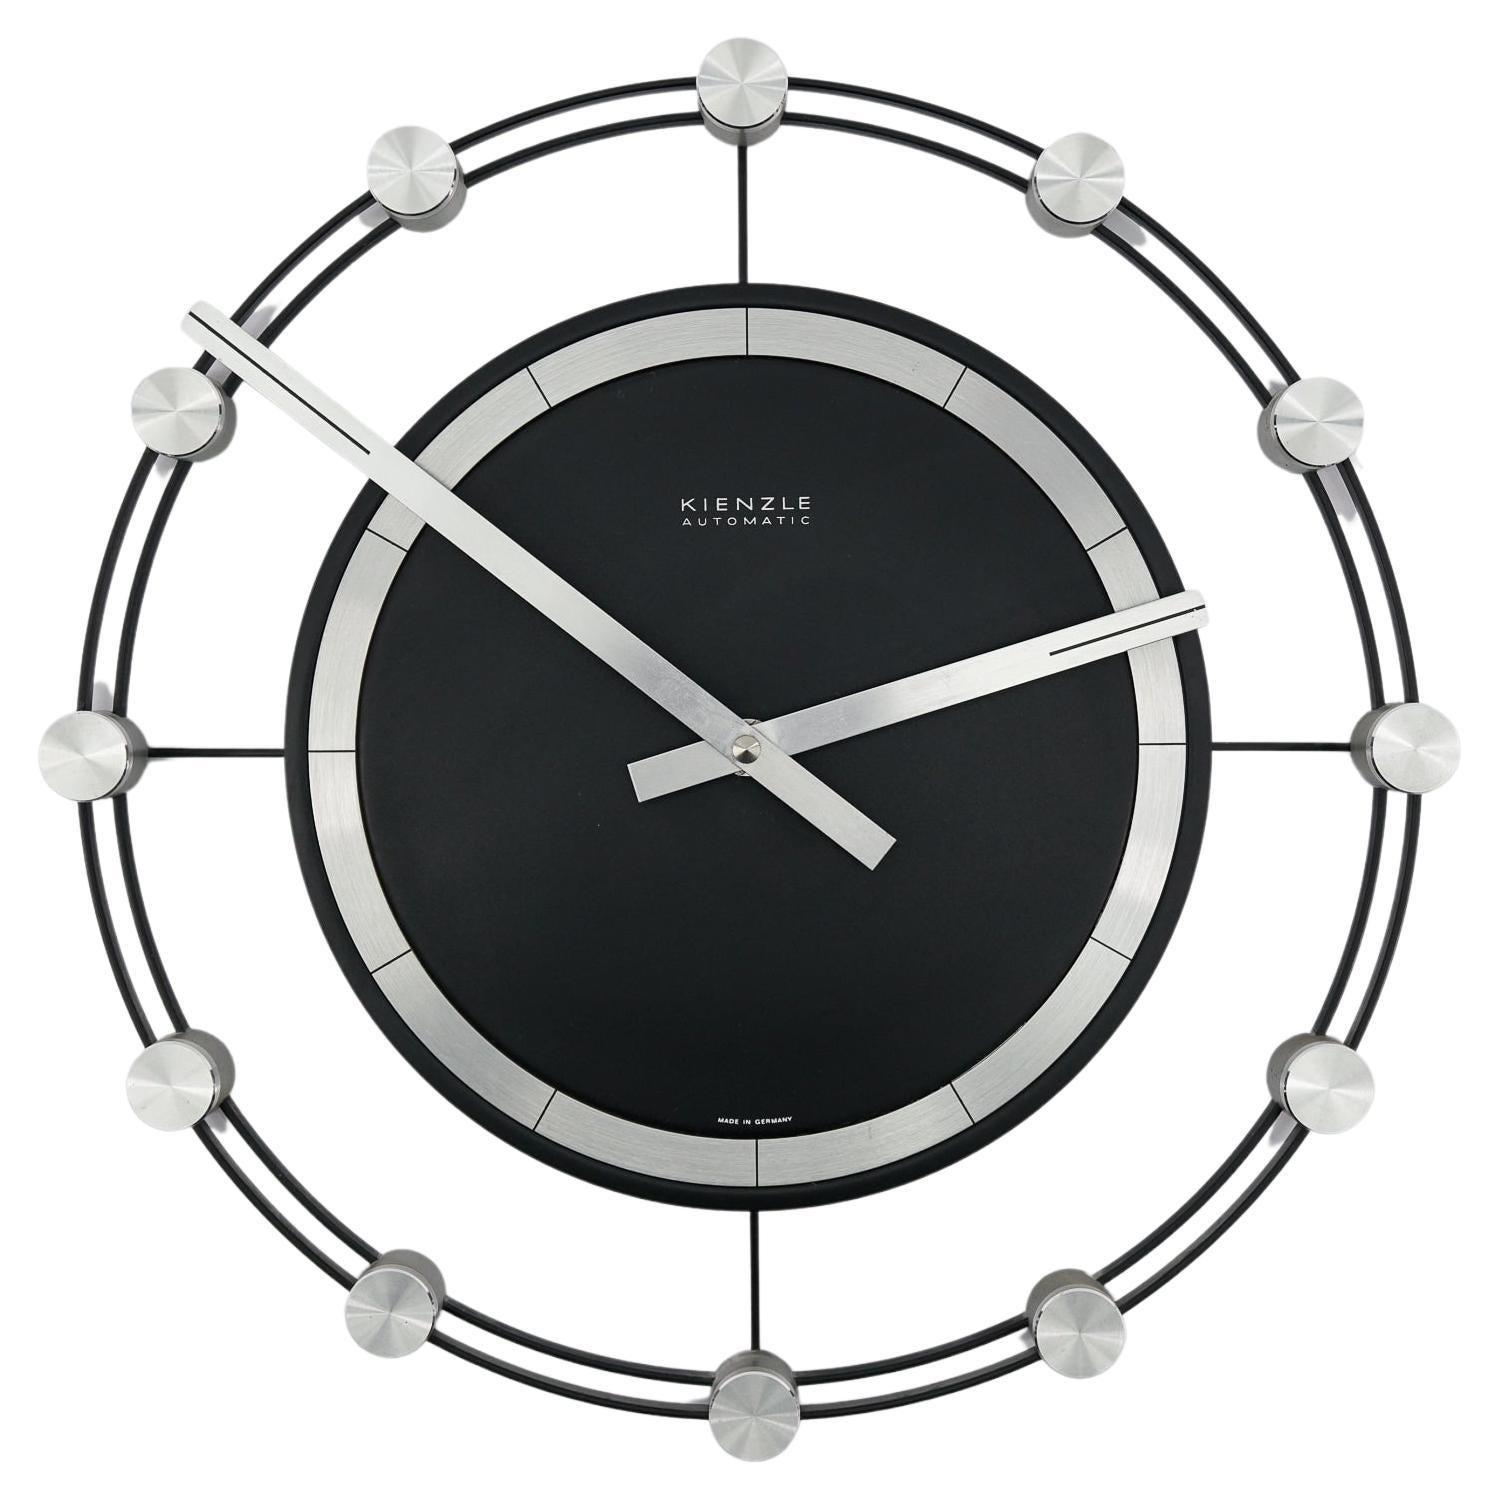 Space Age Sunburst Wall Clock by Kienzle Automatic in Aluminium, 1960s  Germany For Sale at 1stDibs